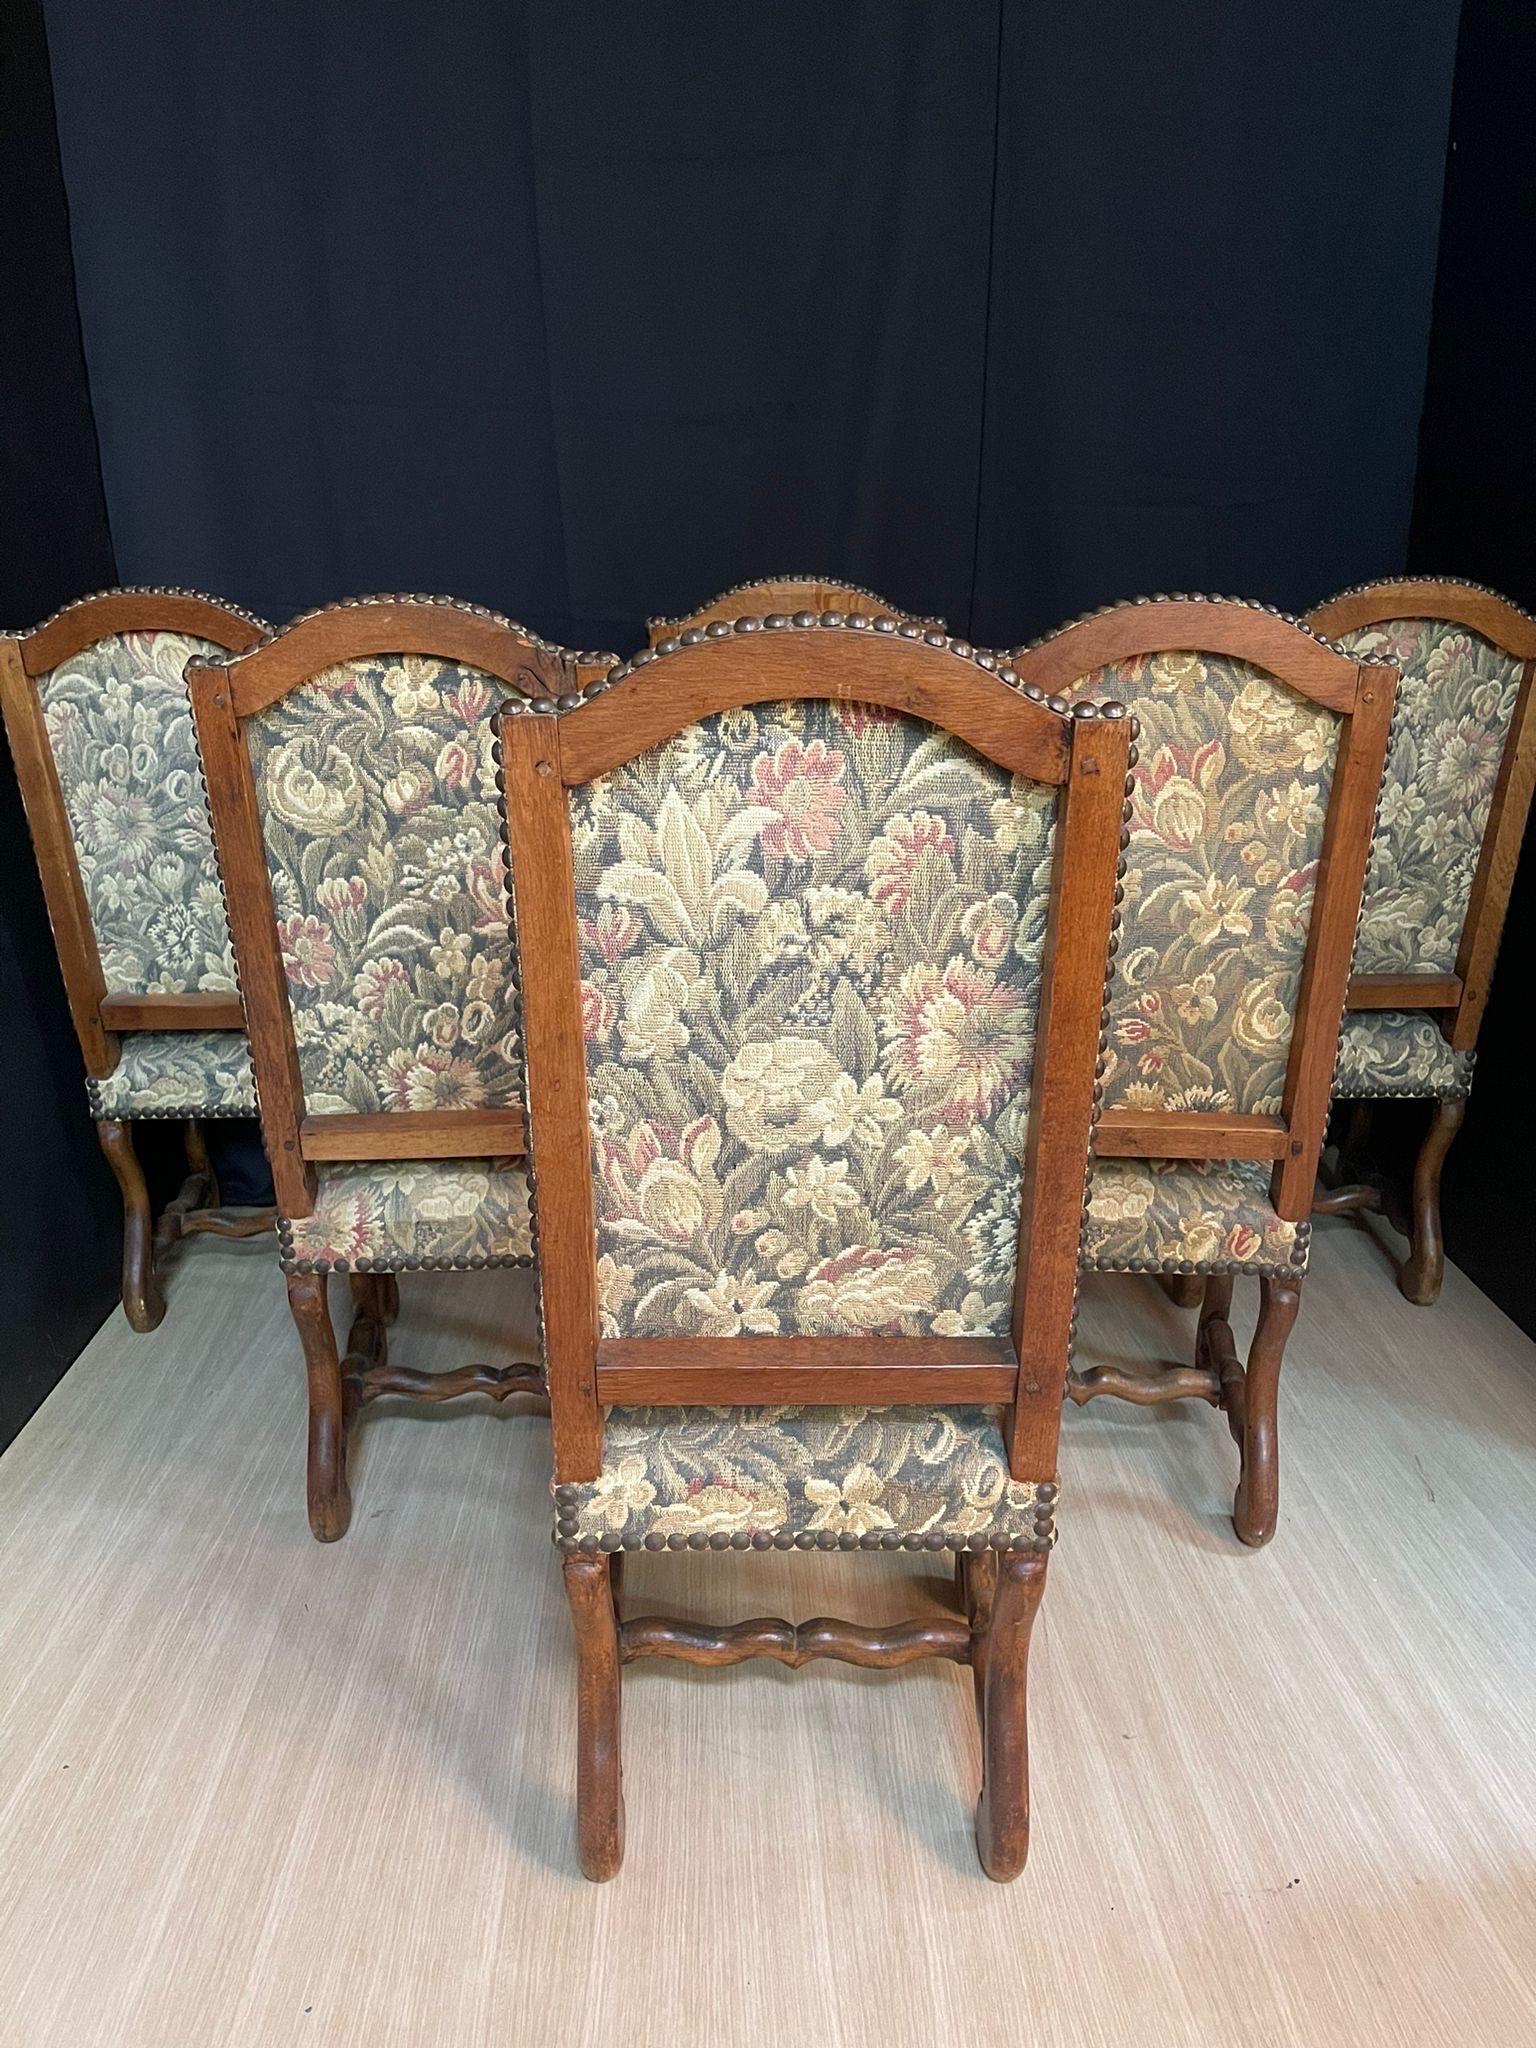 Louis XIV Set of 6 Louis xiv sheep bone chairs original tapestry dating from the  century  For Sale